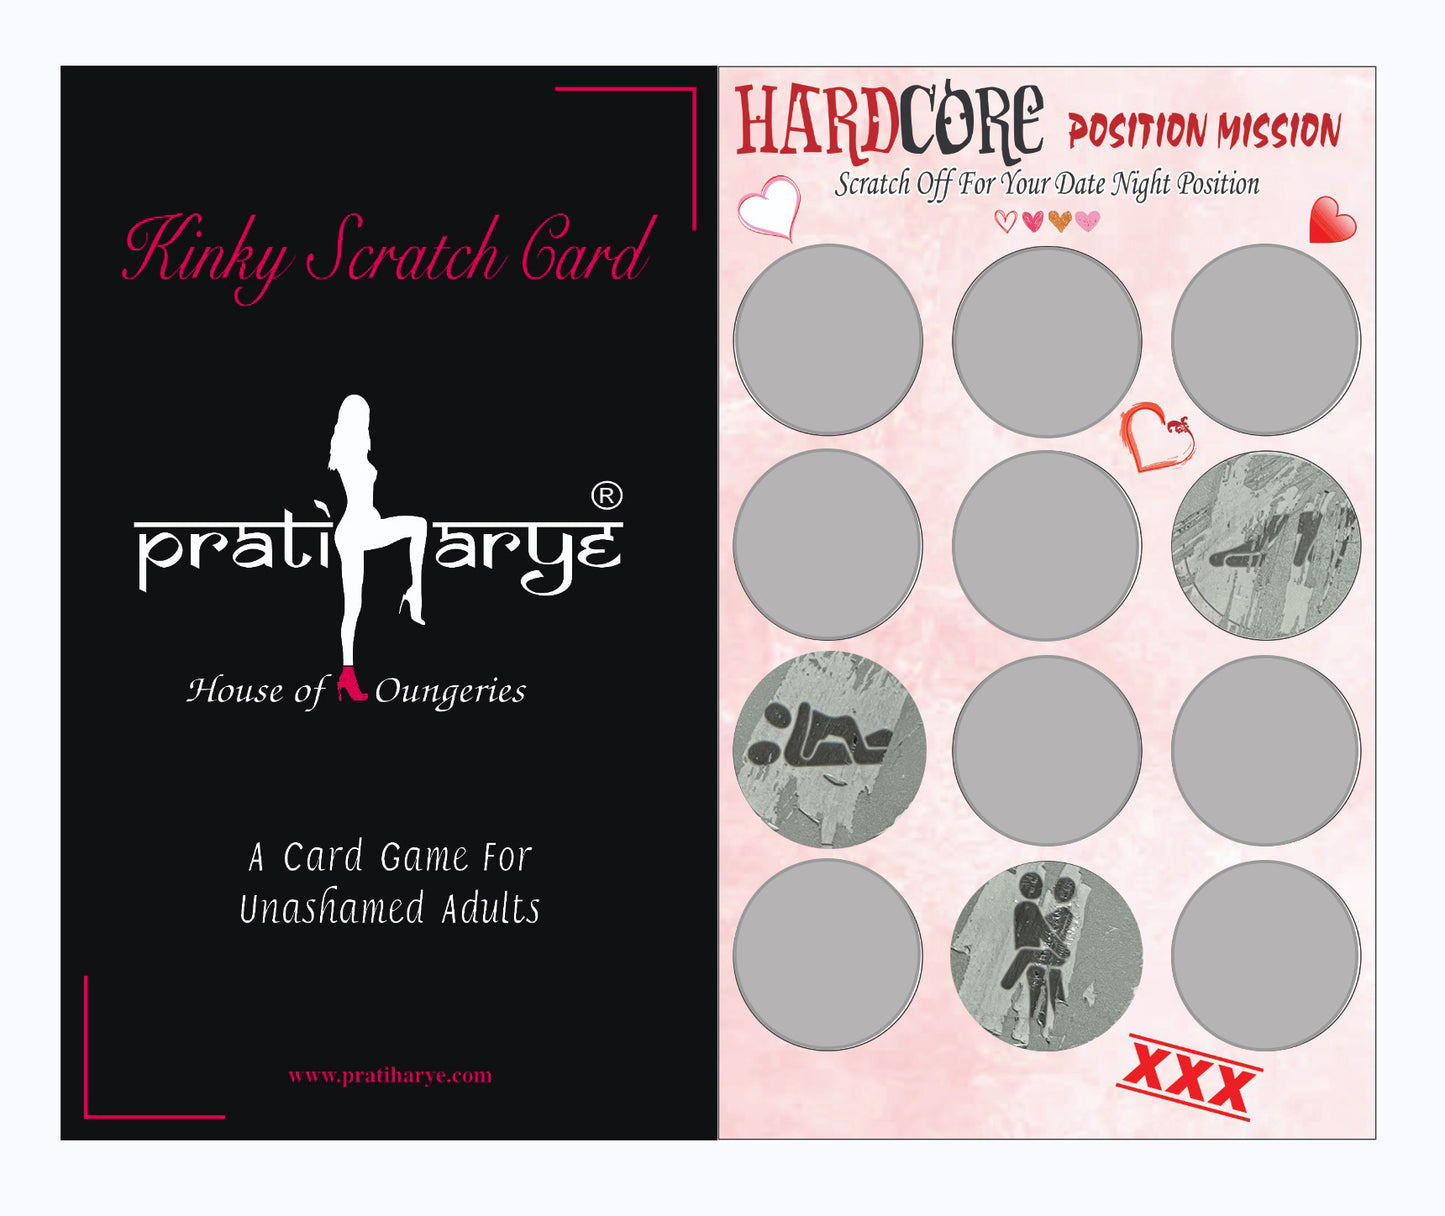 Kinky Scratch card game for adventours couple